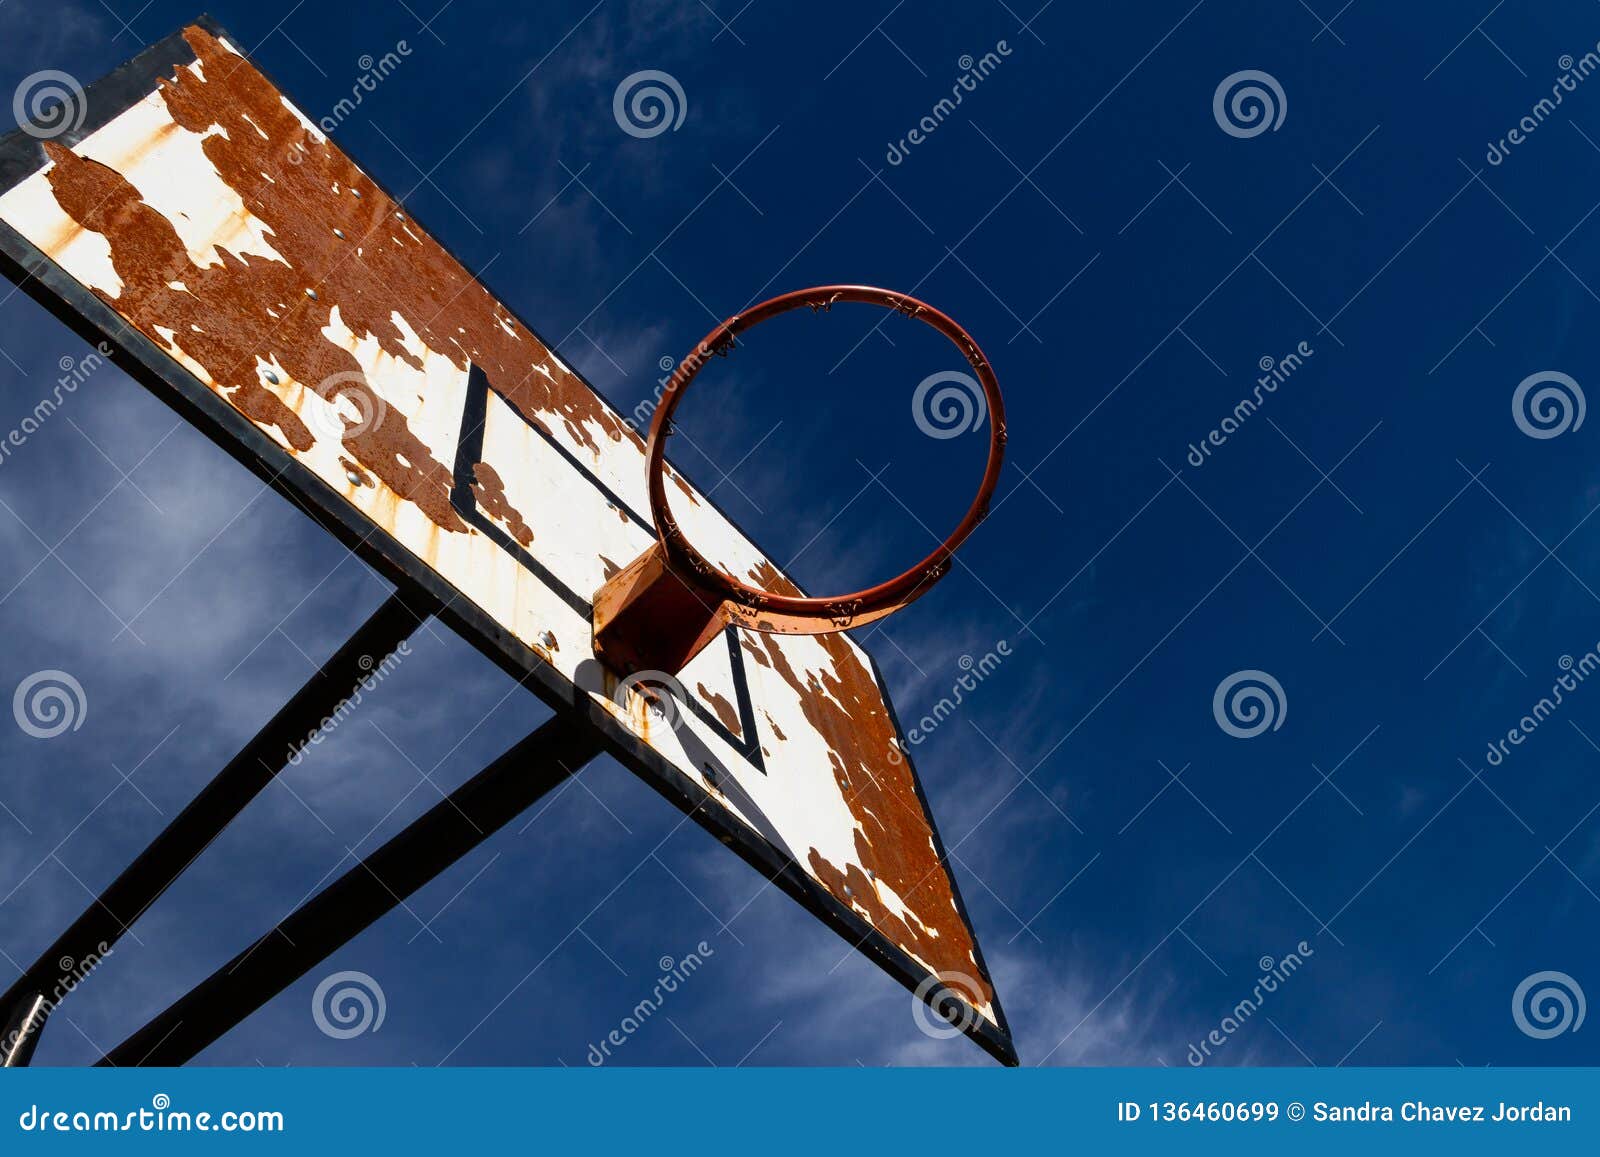 outdoors basketball with a blue sky